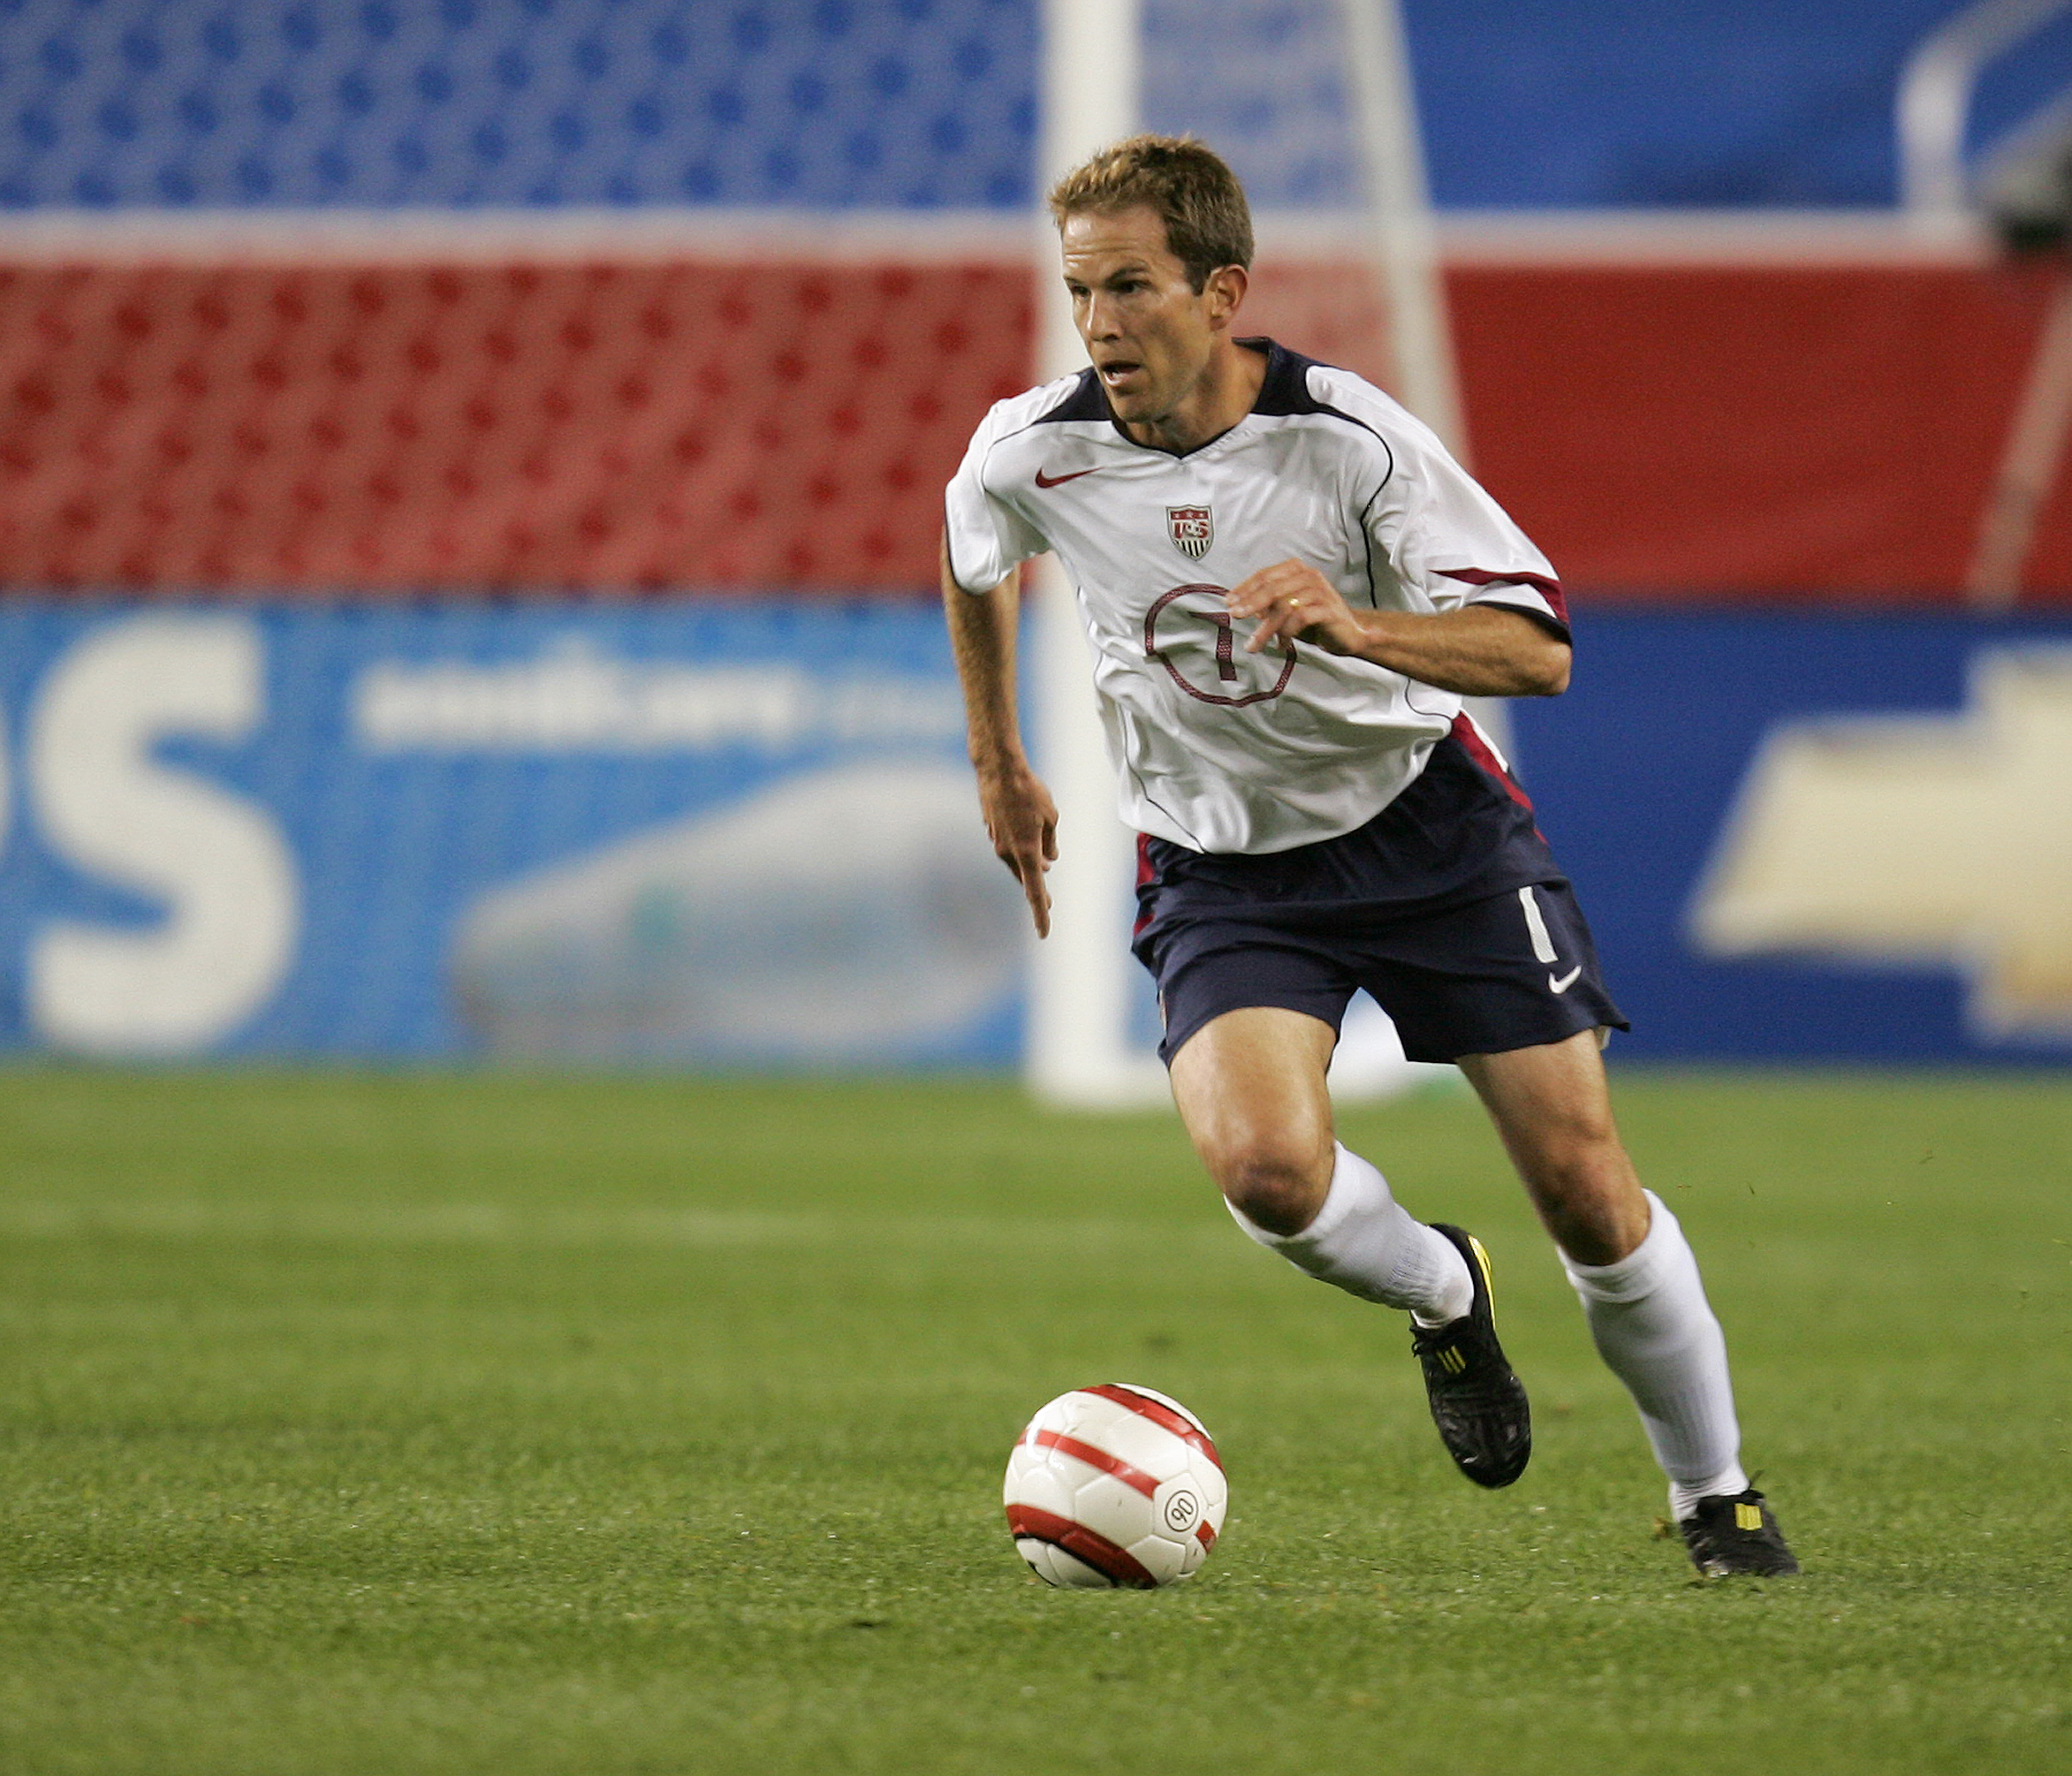 Eddie Lewis made 82 appearances for the USA and represented them at both the 2002 and 2006 World Cups 